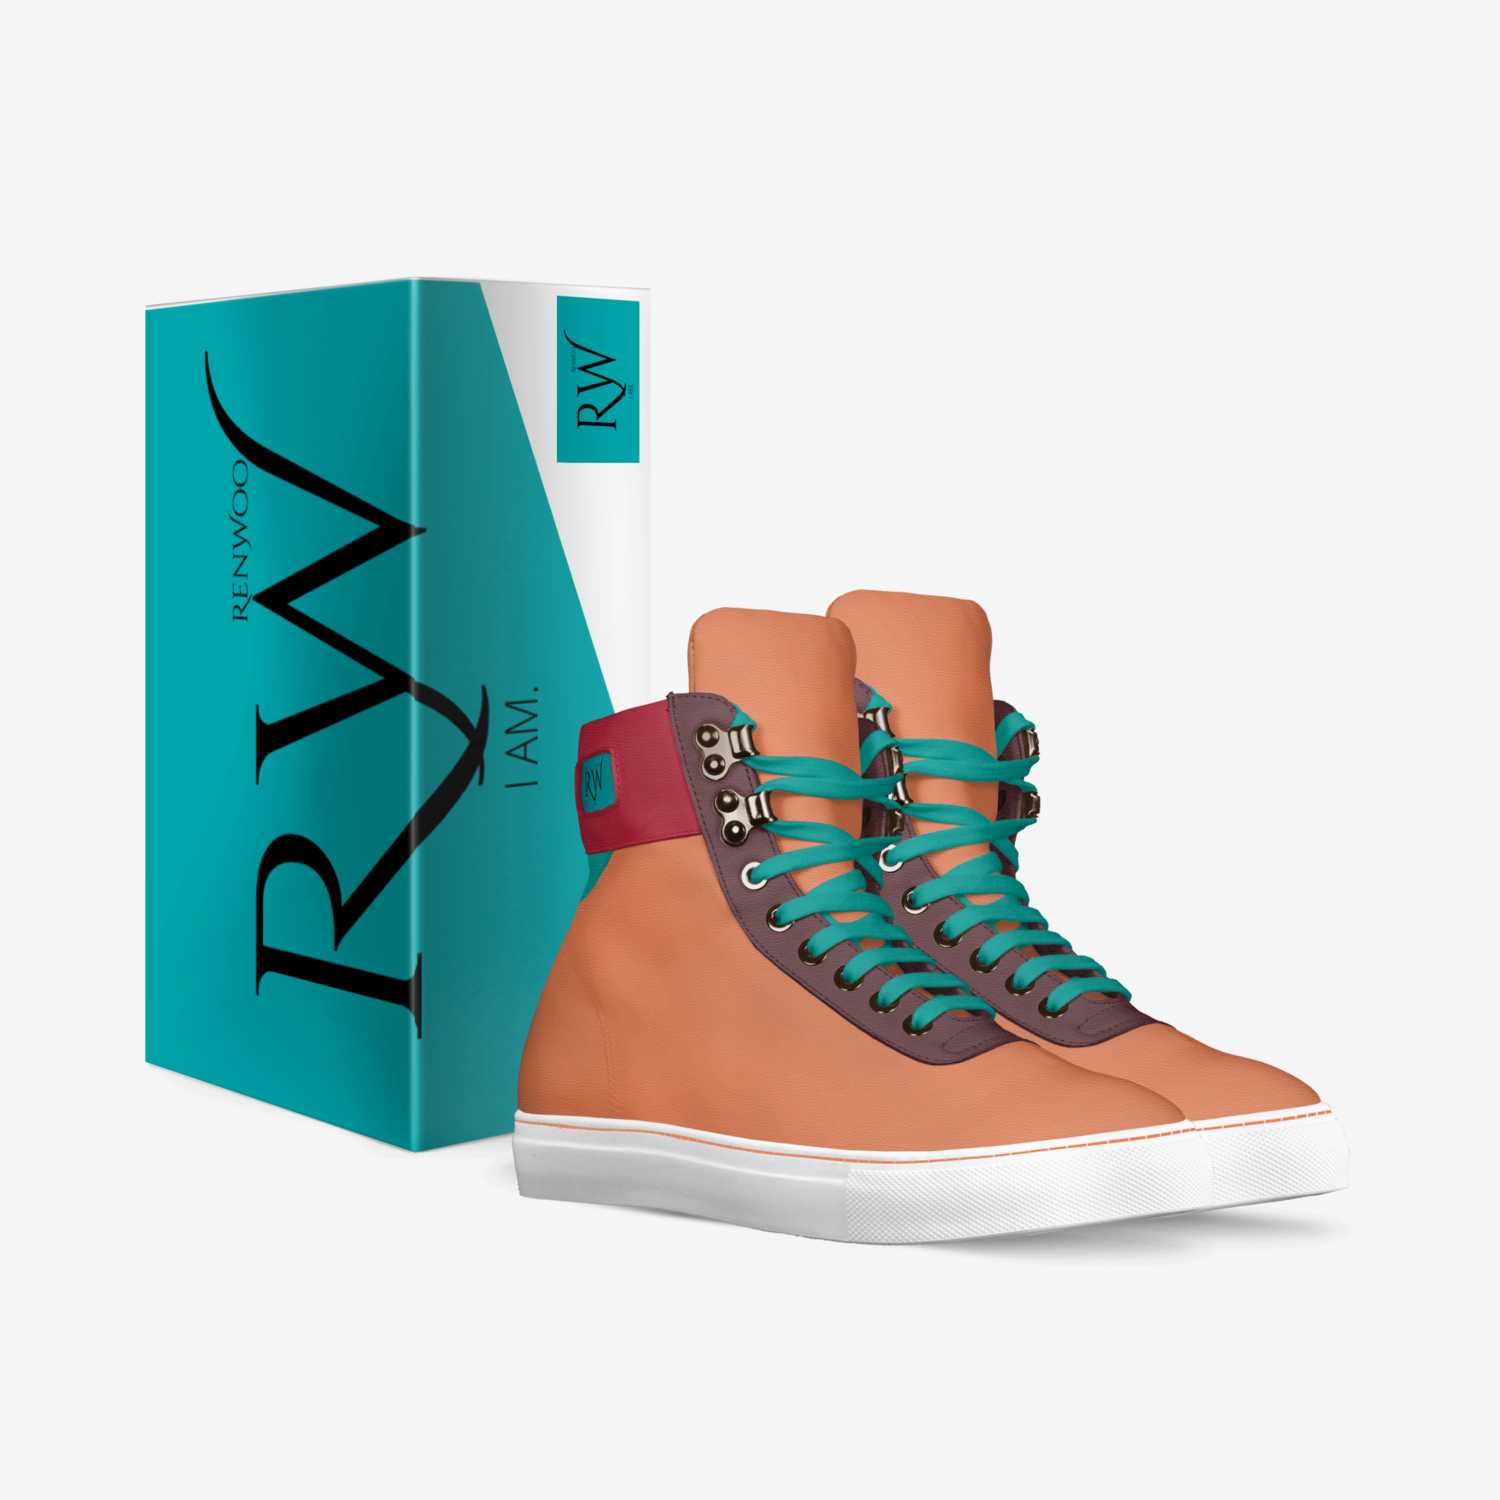 RenWoo "I AM" custom made in Italy shoes by Ren Woo | Box view